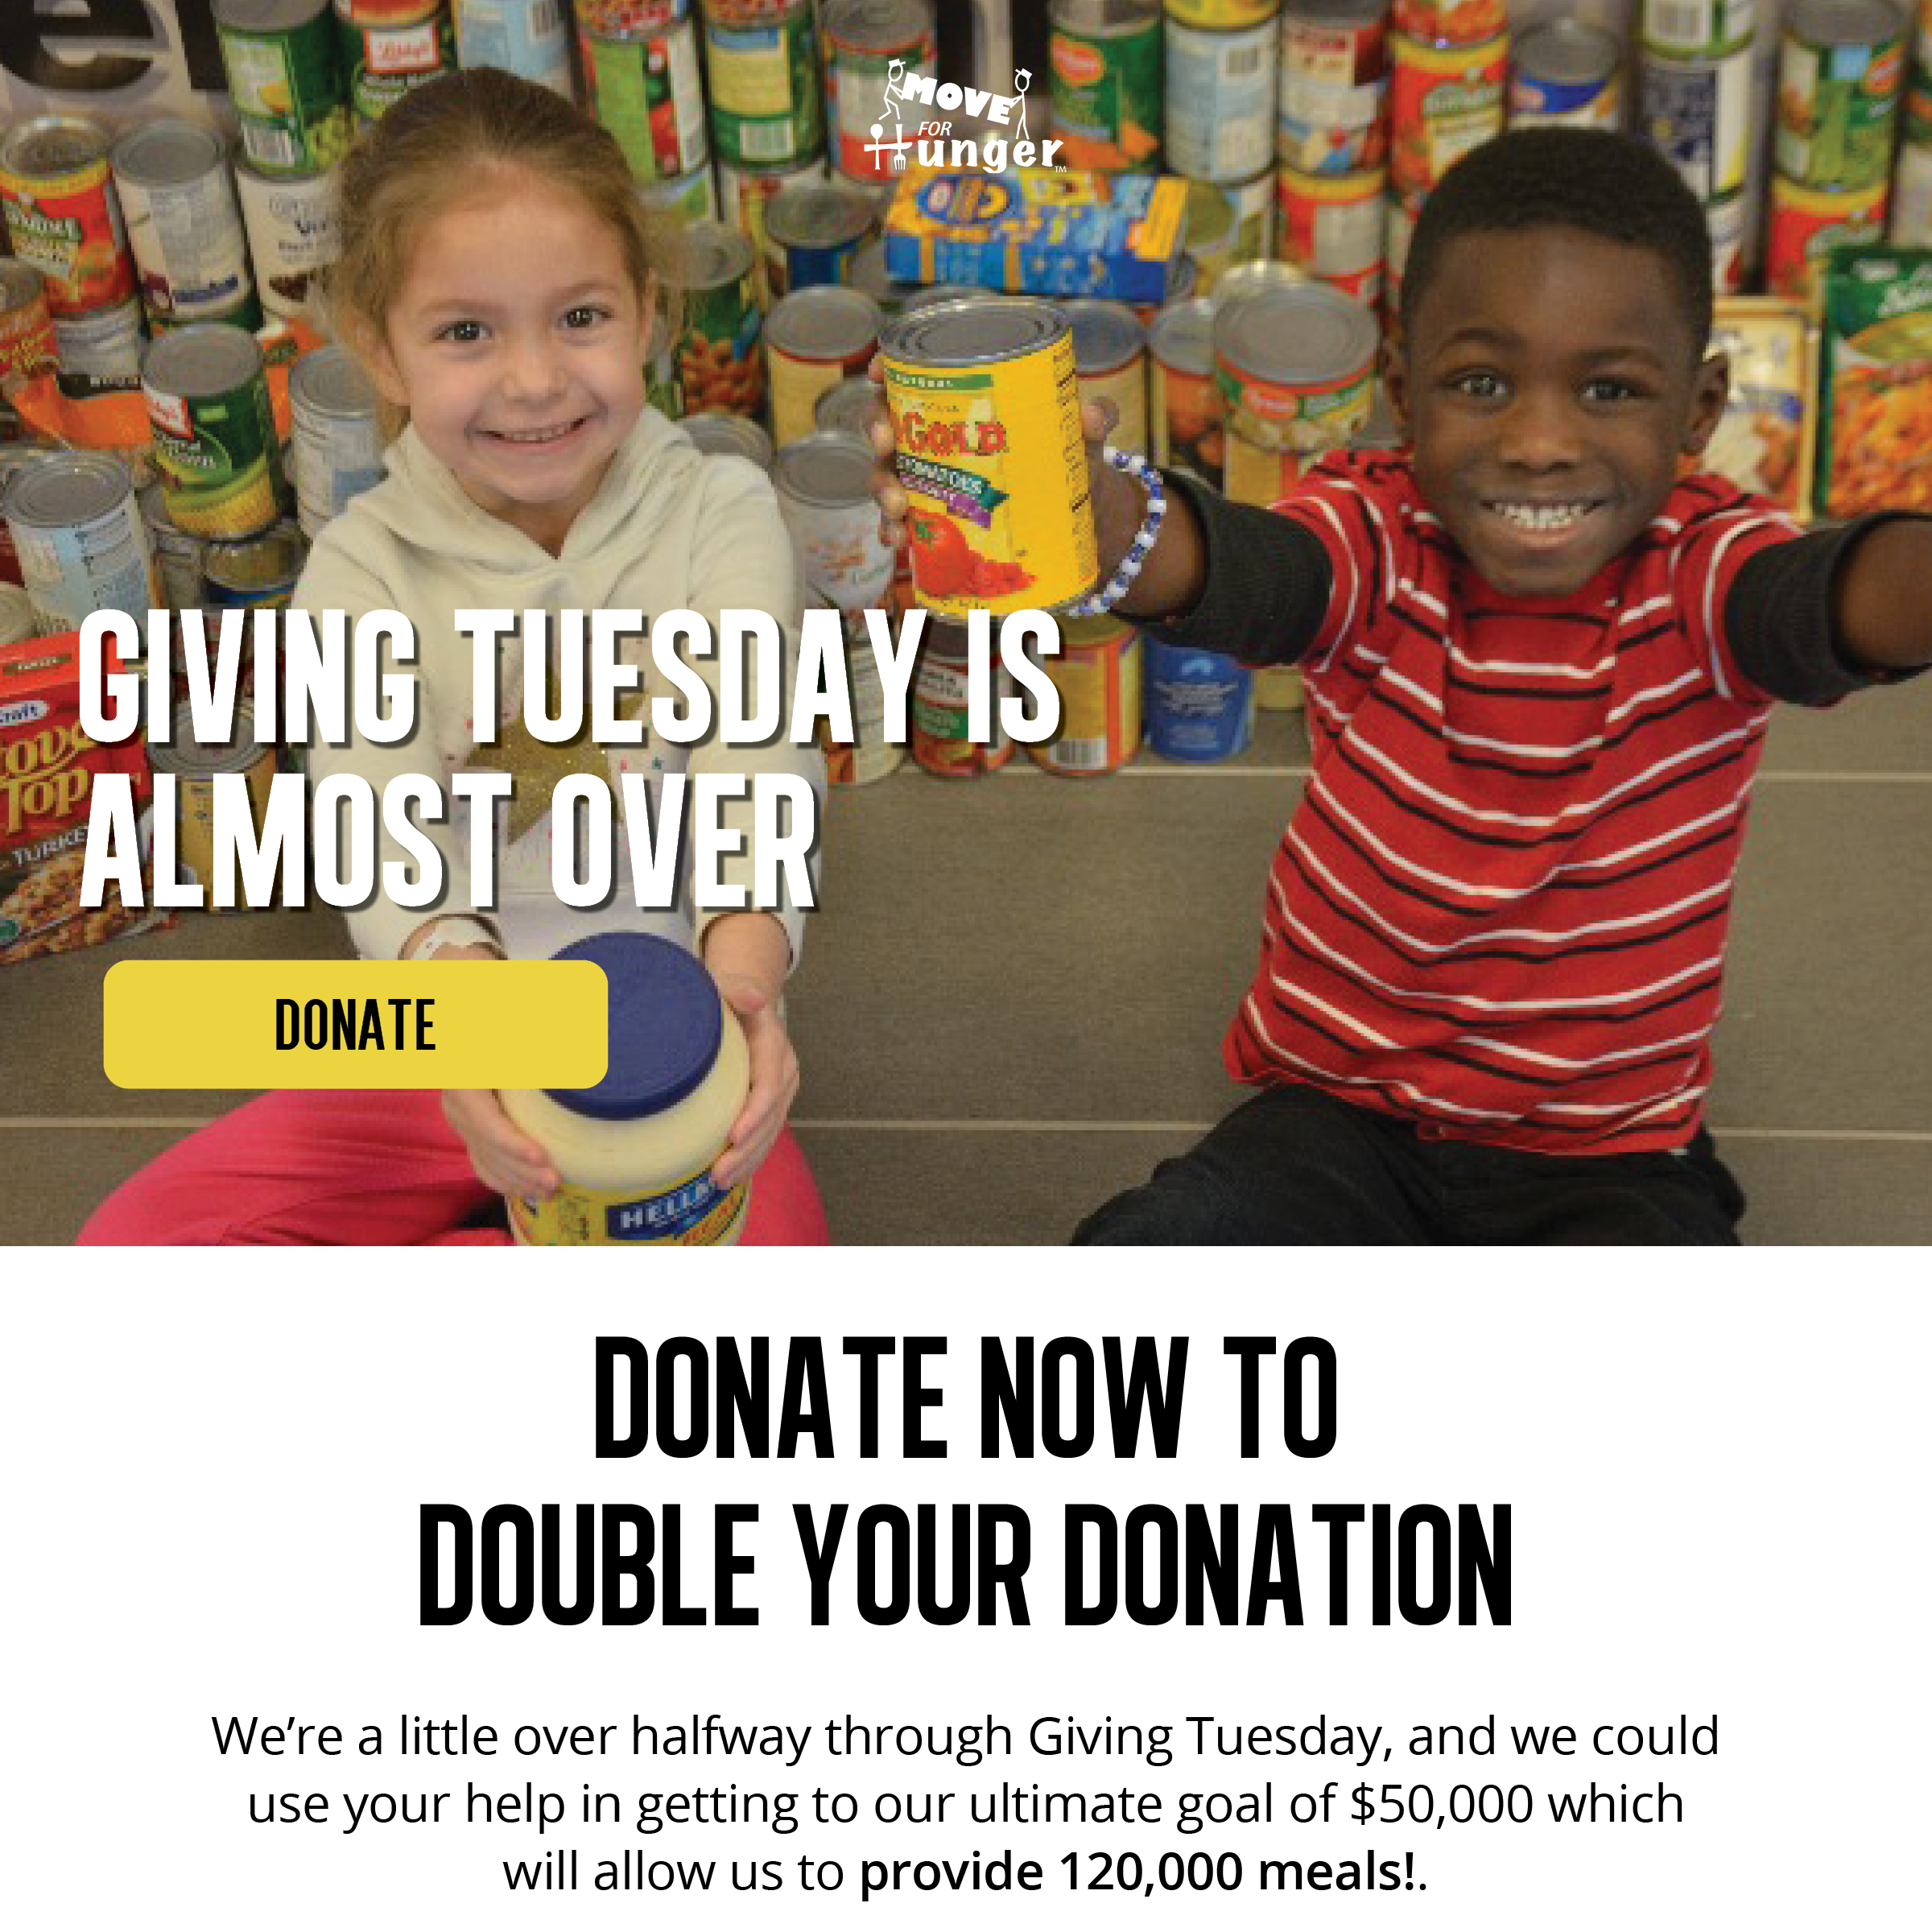 Giving Tuesday is almost over